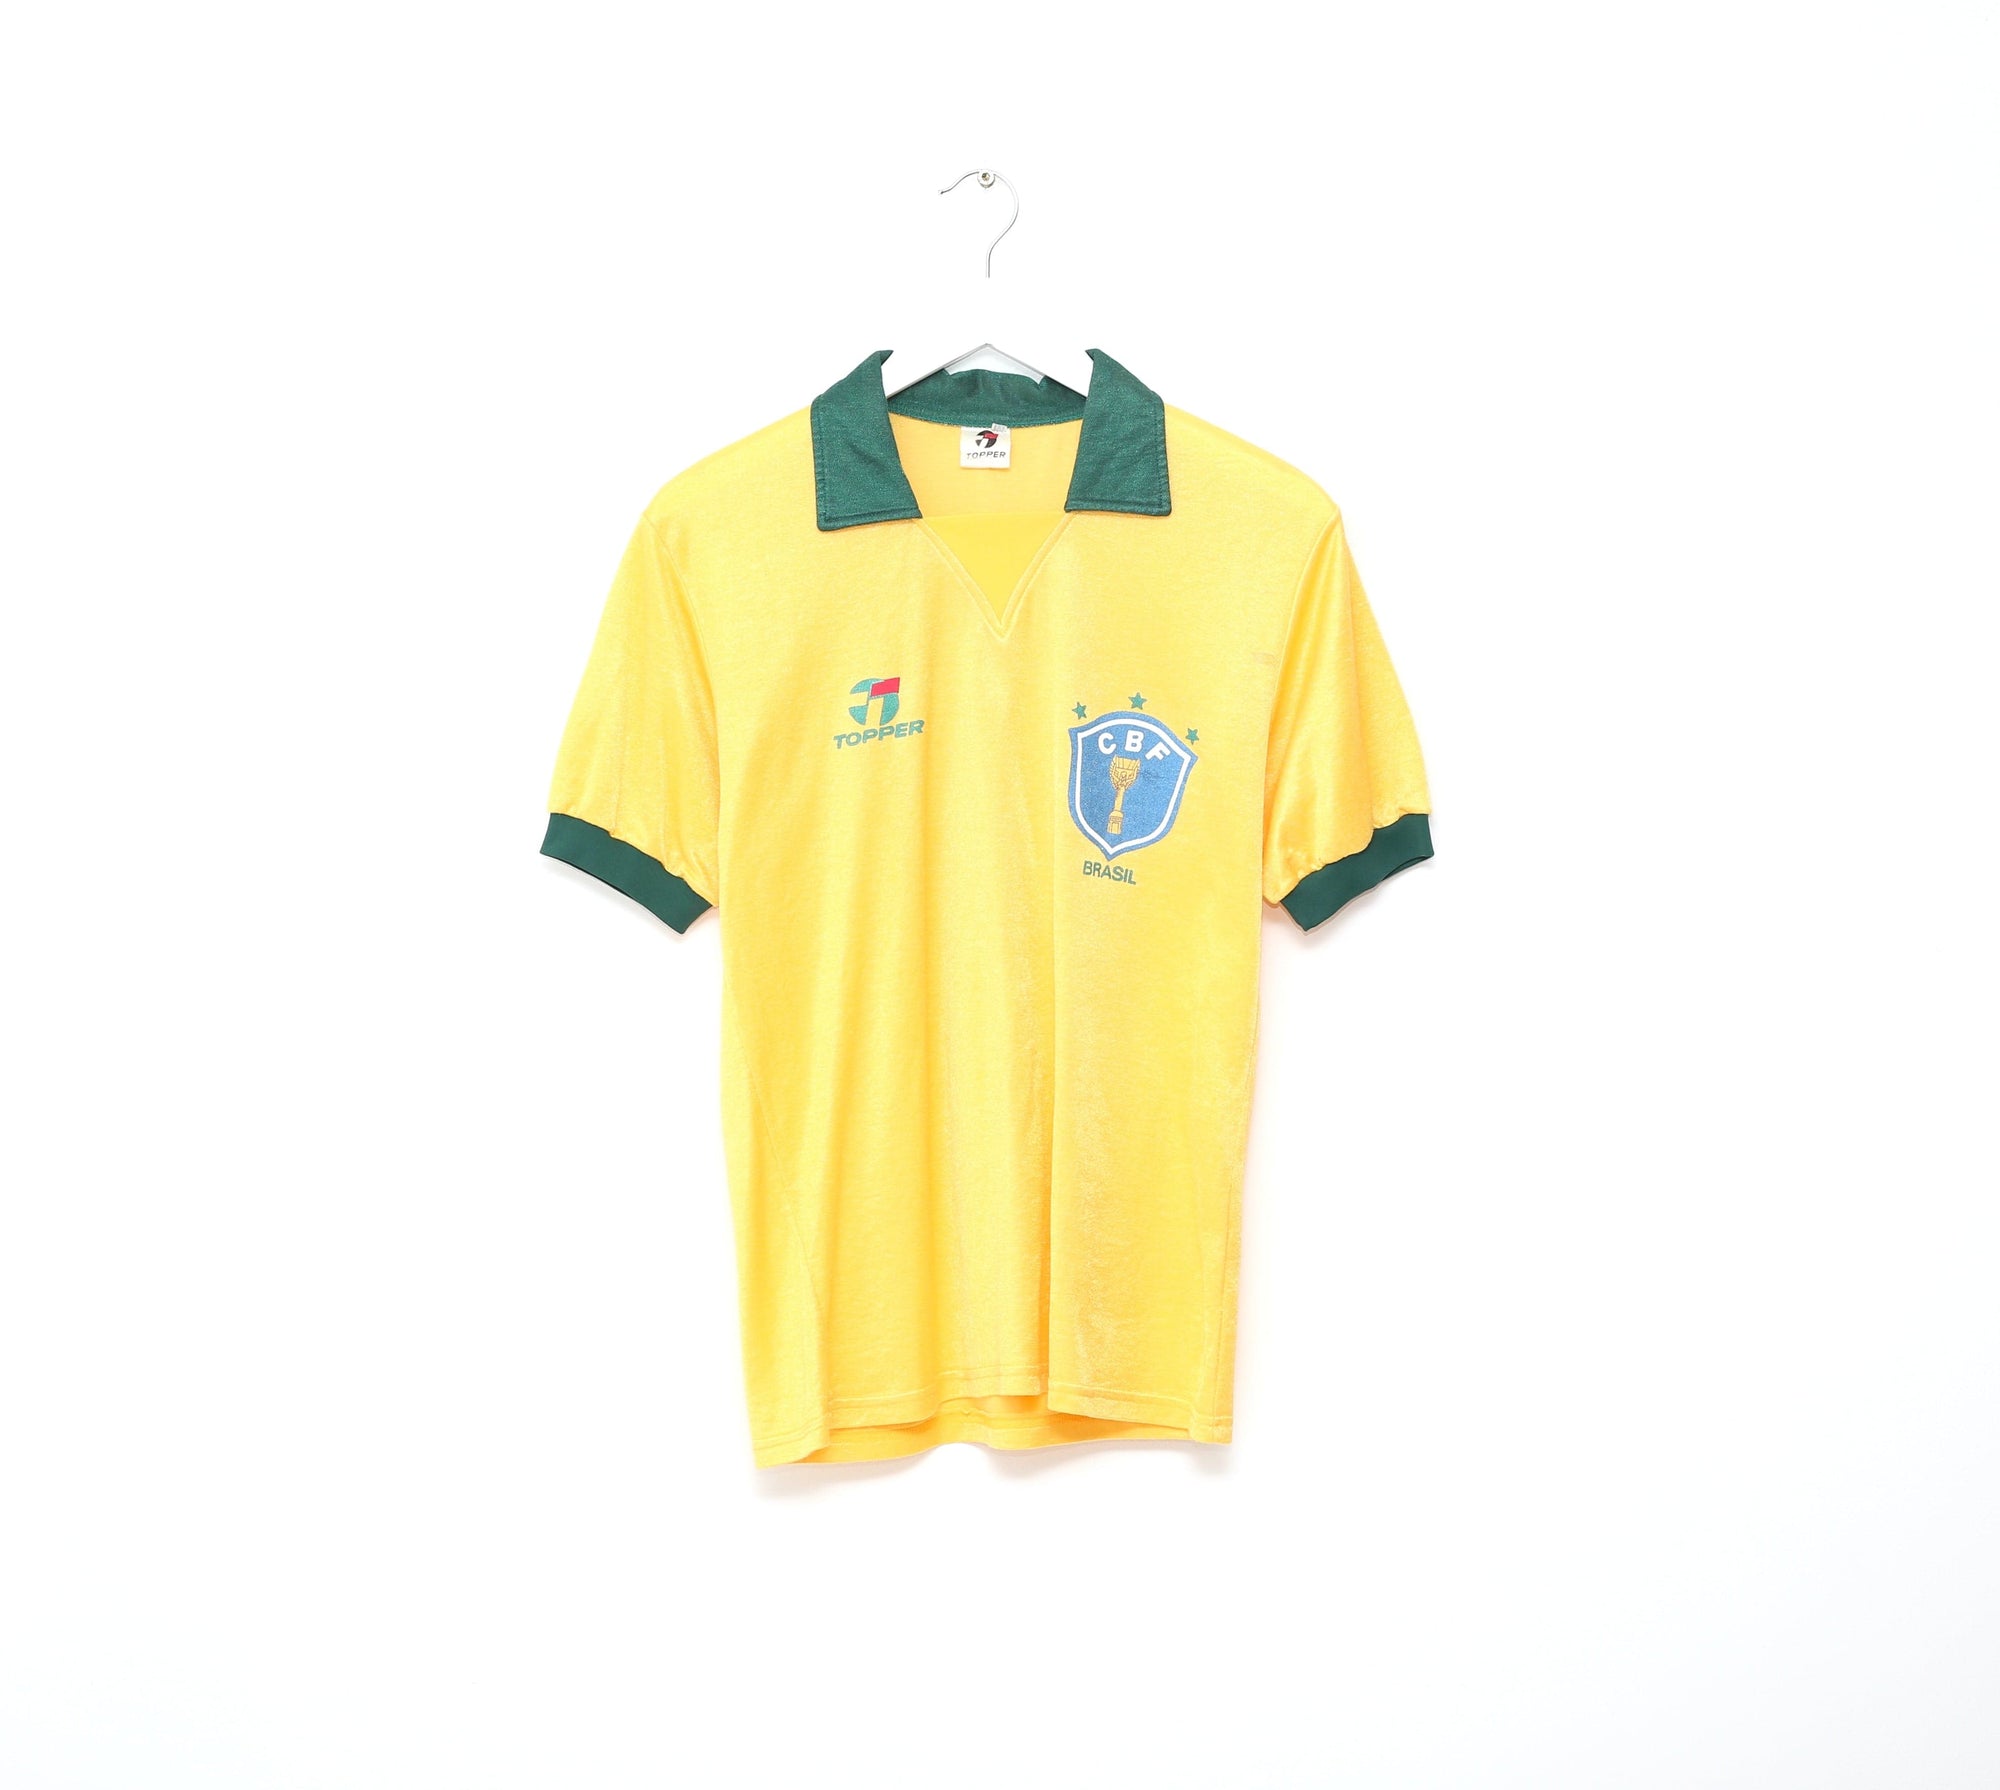 Brazil National Team Kids Soccer Kit | Jersey, Shorts, and Ball with Green  and Yellow Design | Neymar and Pelé Inspired Design